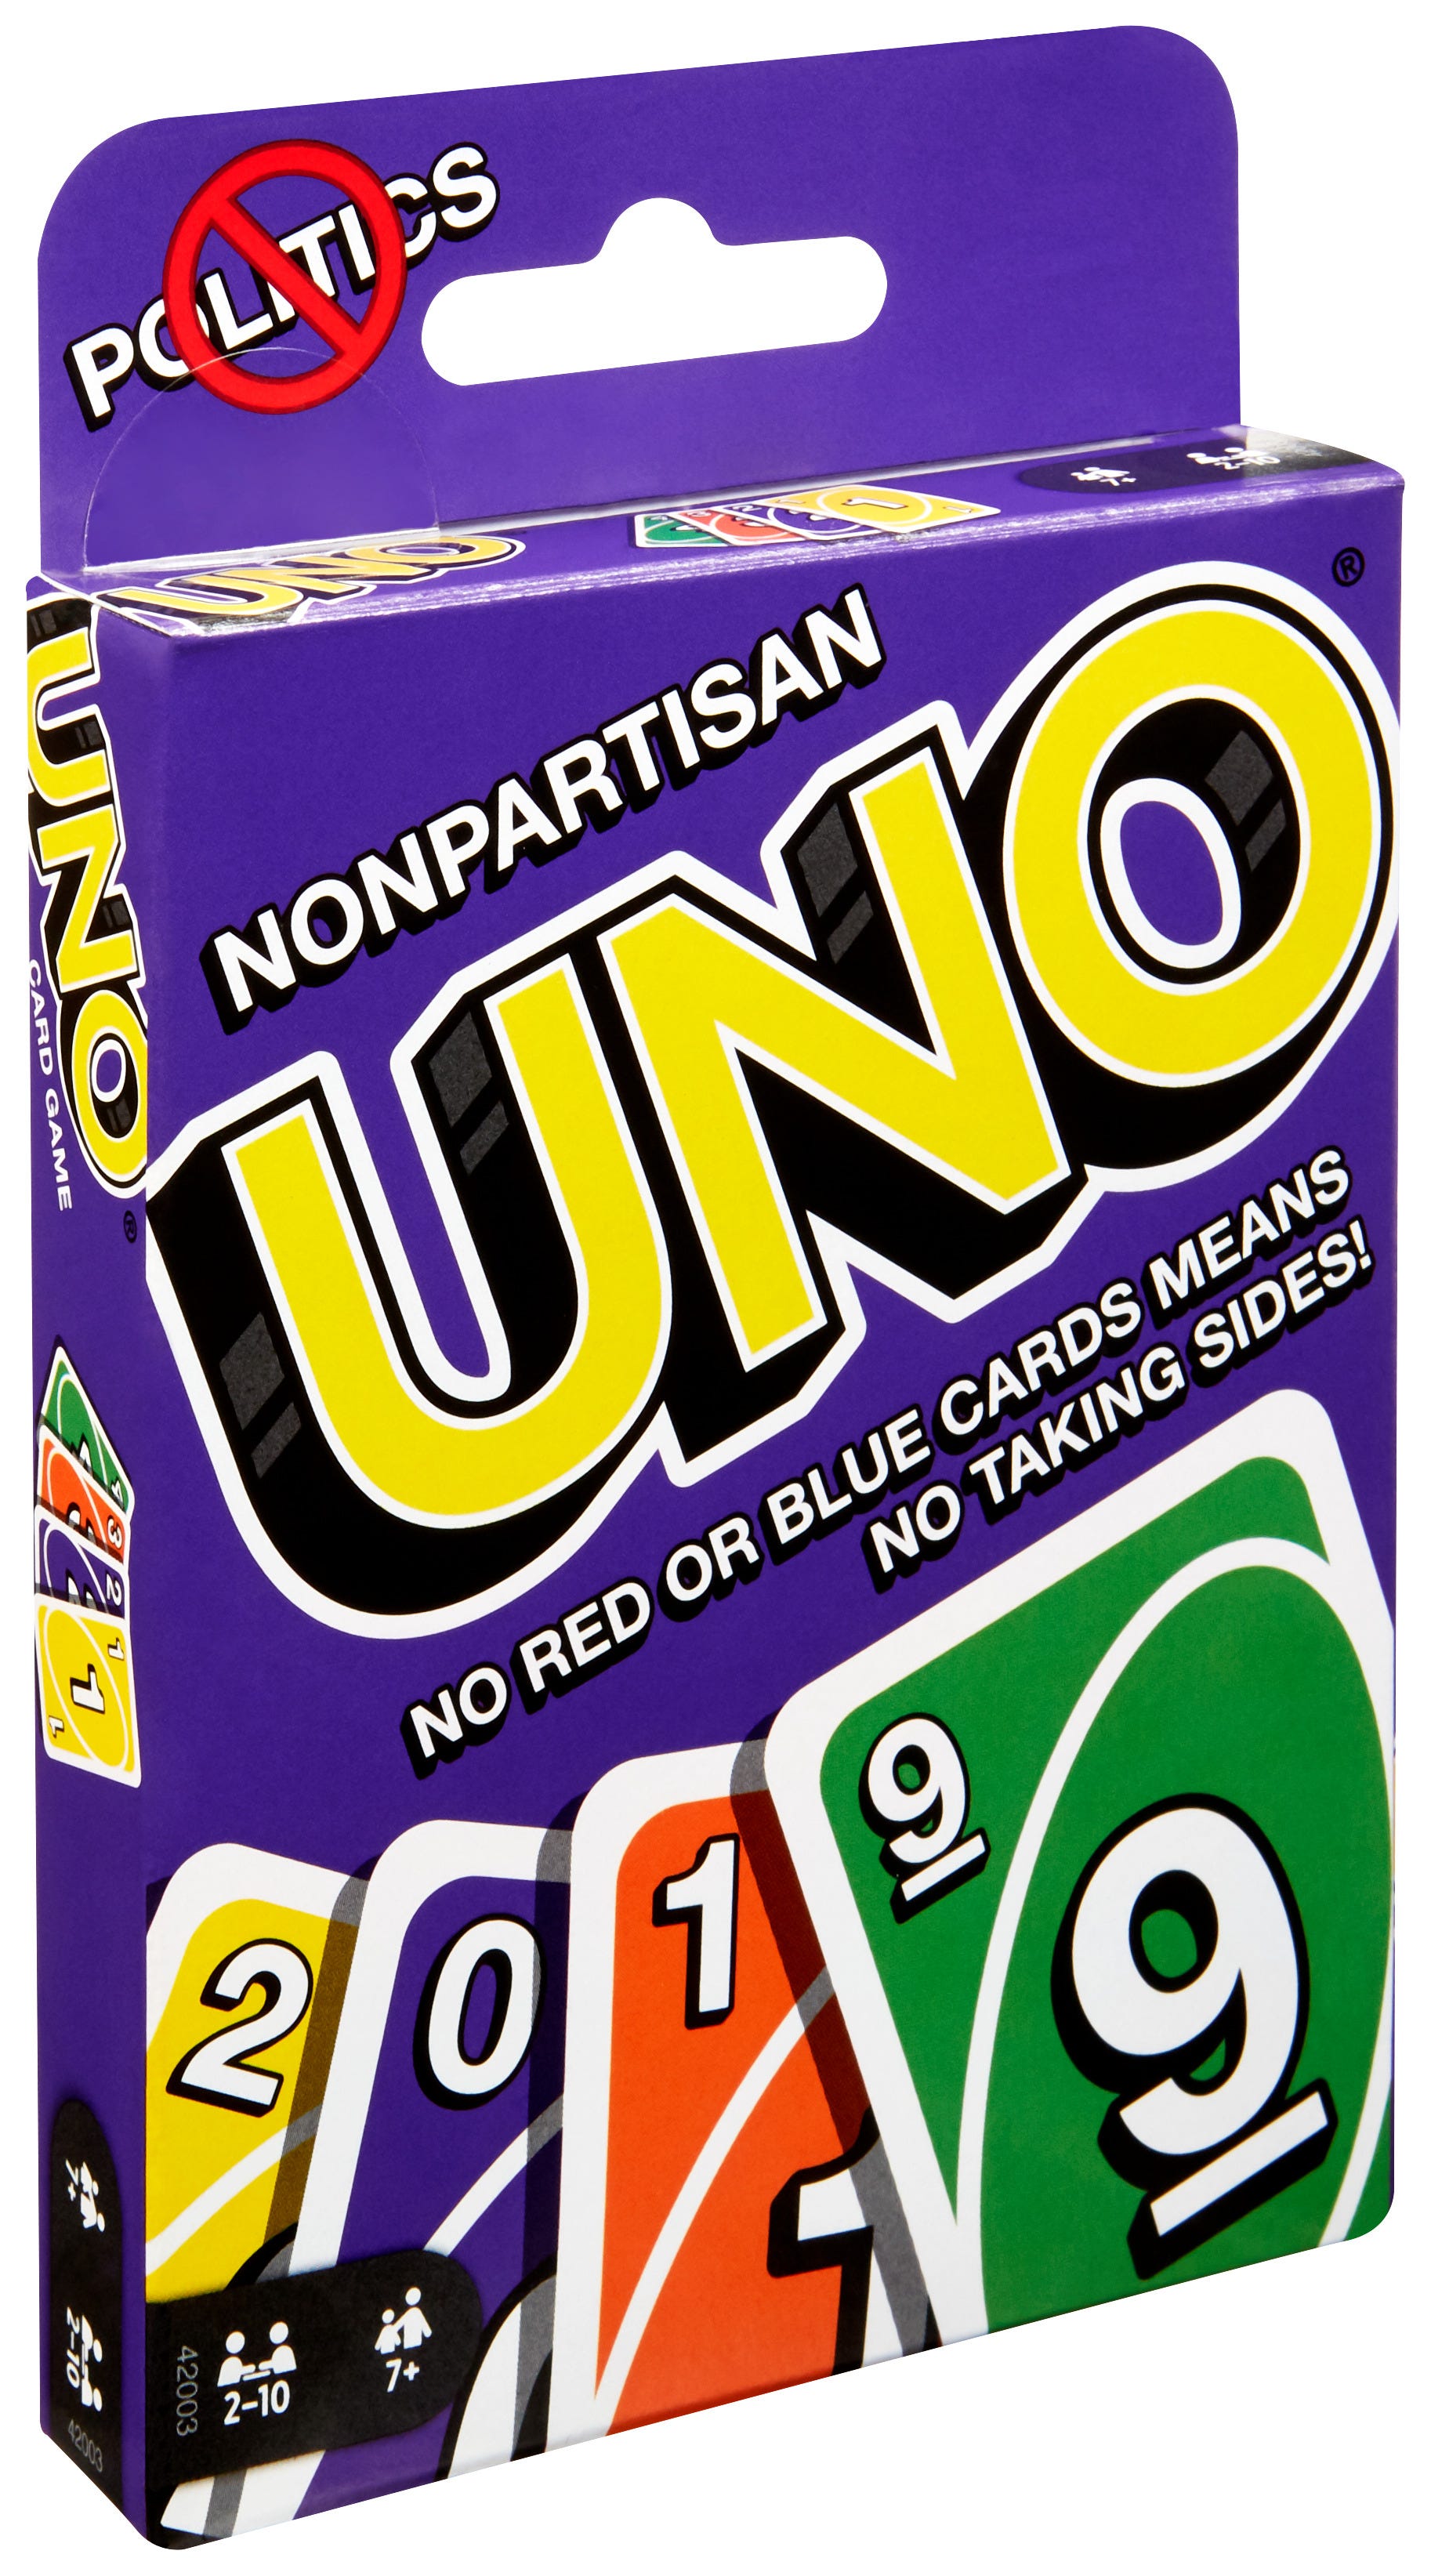 2019 Mattel NonPartisan UNO Card Game No Politics No Red or Blue Cards 